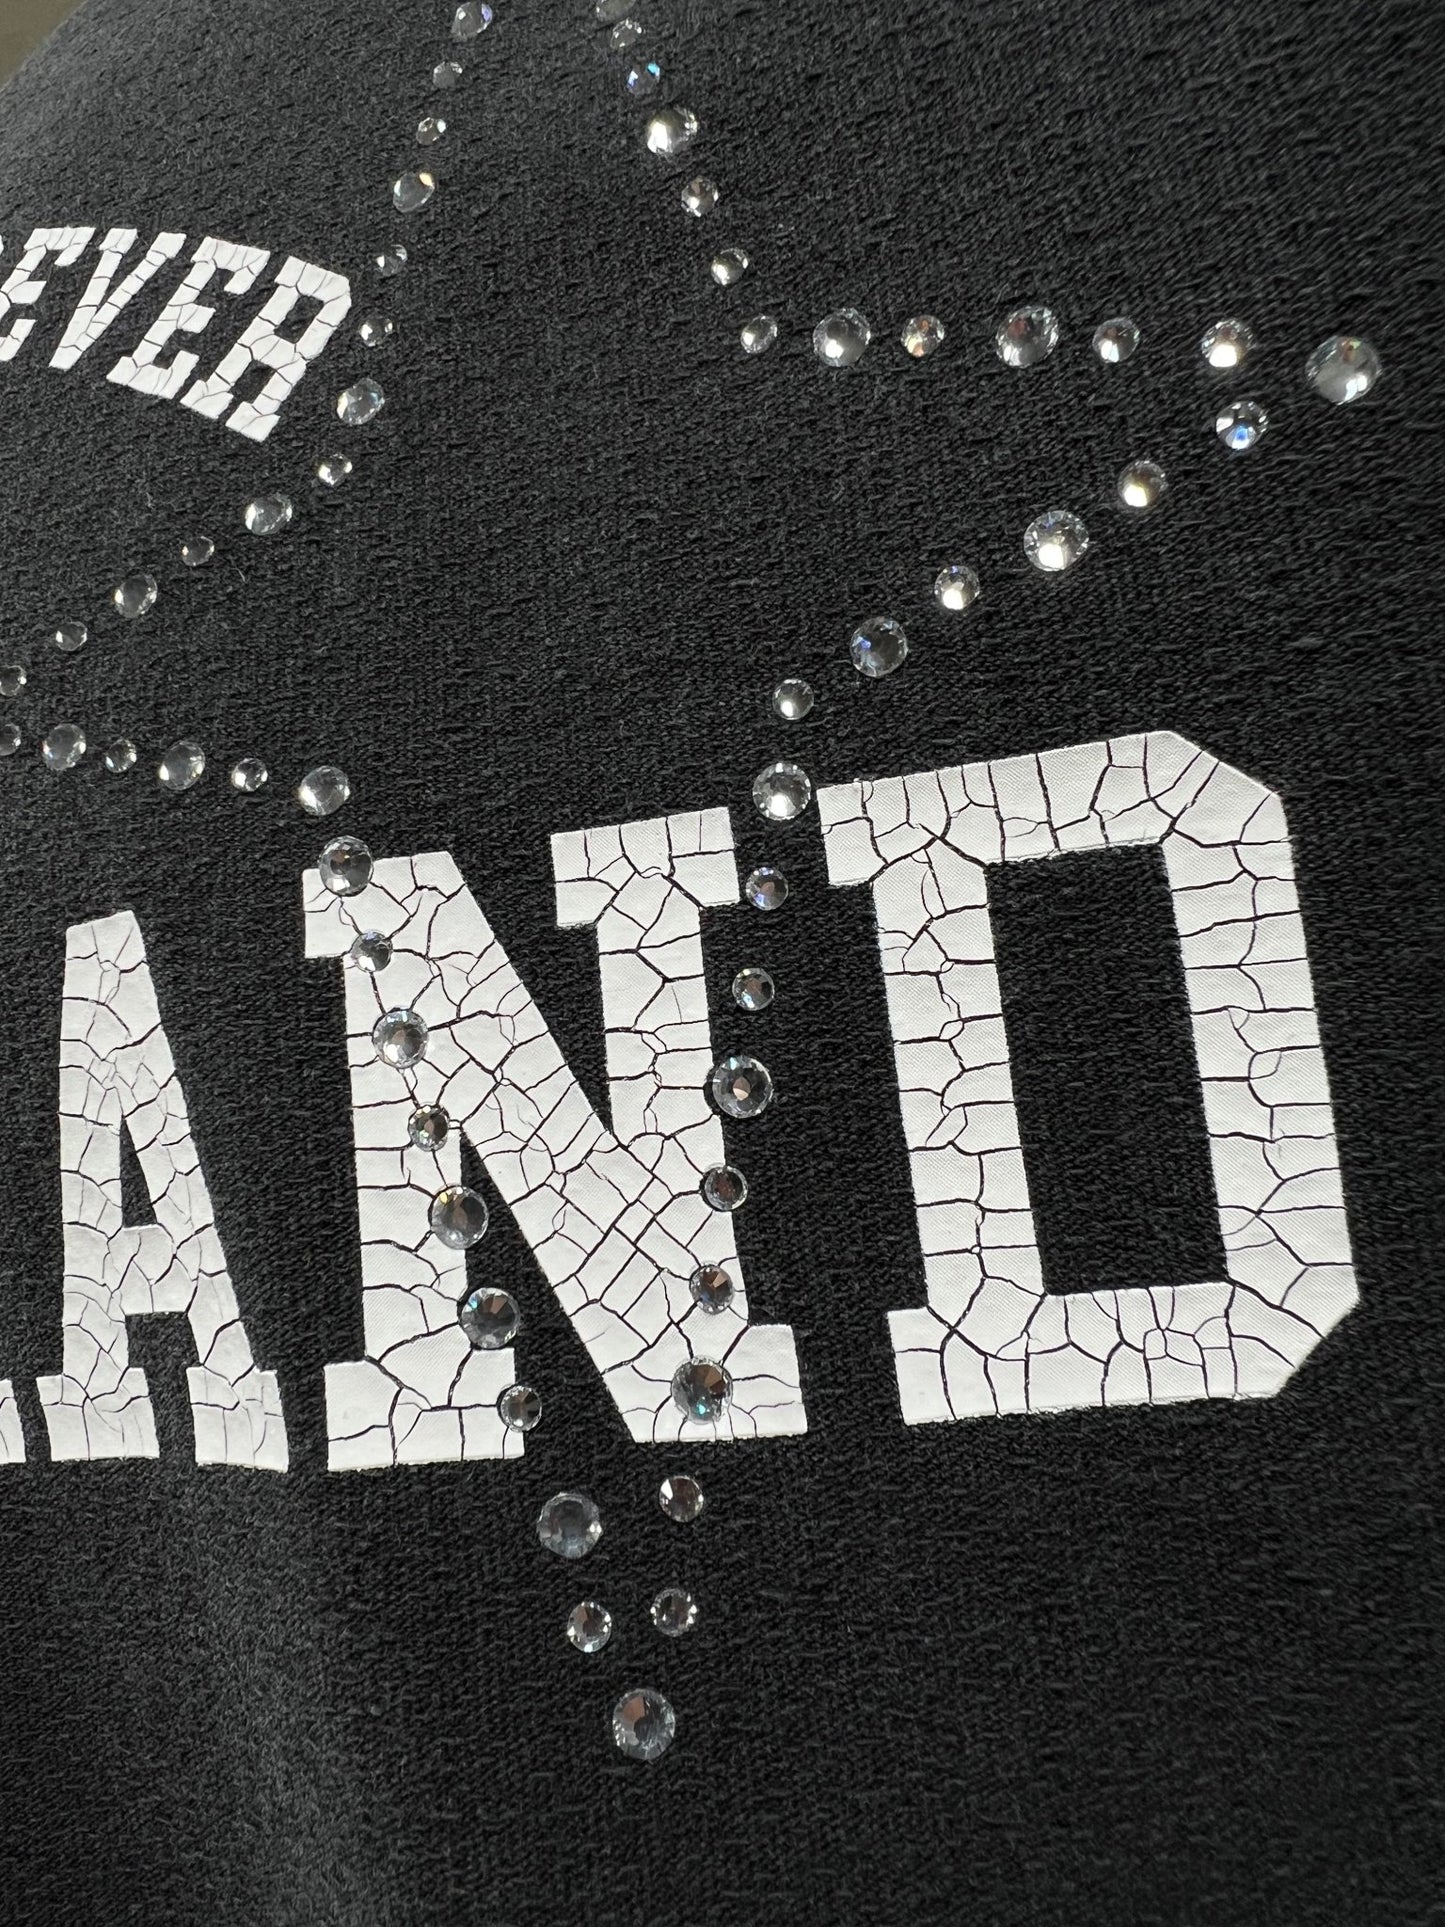 Close-up of a black cotton fabric with white cracked text that reads "LAND," embellished with small, transparent beads arranged in a starburst pattern like crystal stars. "EVER" is visible in the top left corner, adding a stylish touch to this PURPLE BRAND P104-JSCB TEXTURED JERSEY TEE BLACK by PURPLE BRAND.